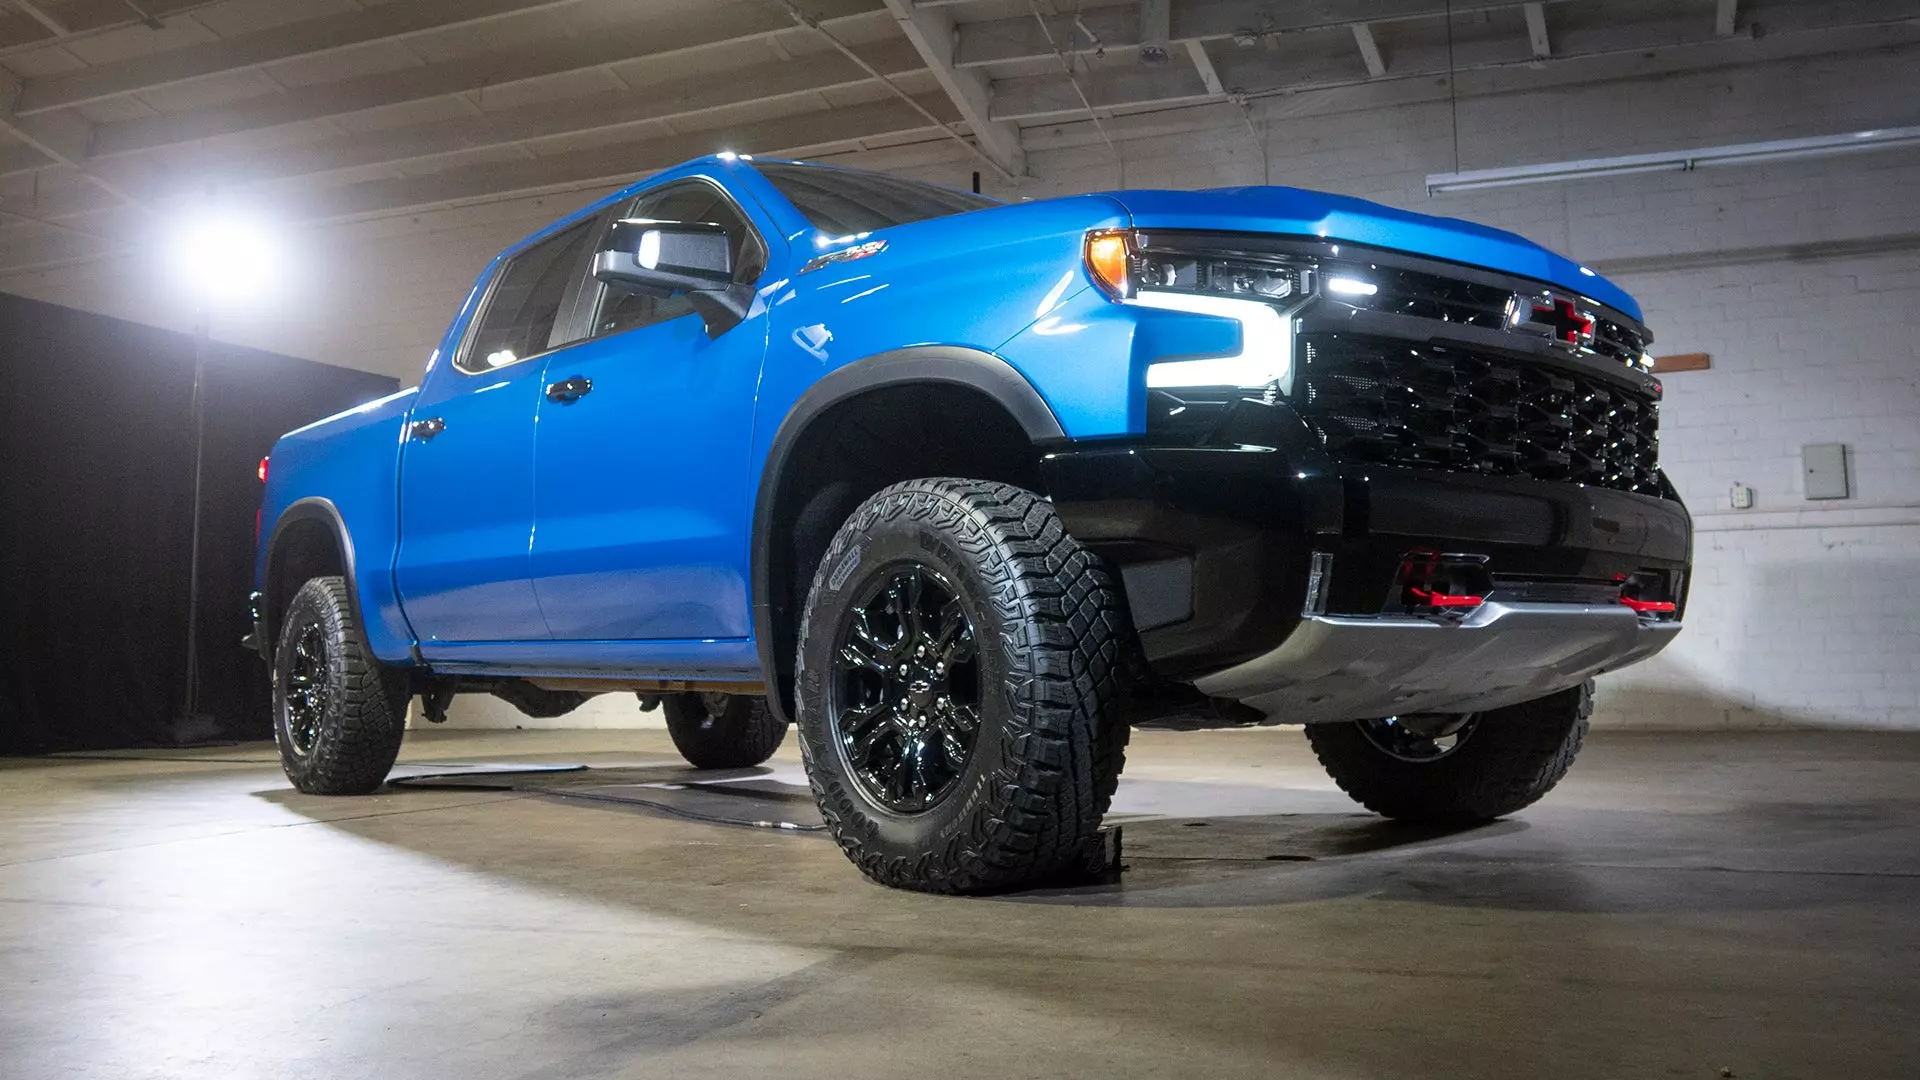 The ZR2 Off-Road Treatment Really Saves the Chevy Silverado’s Design (Pic Gallery) | Autance